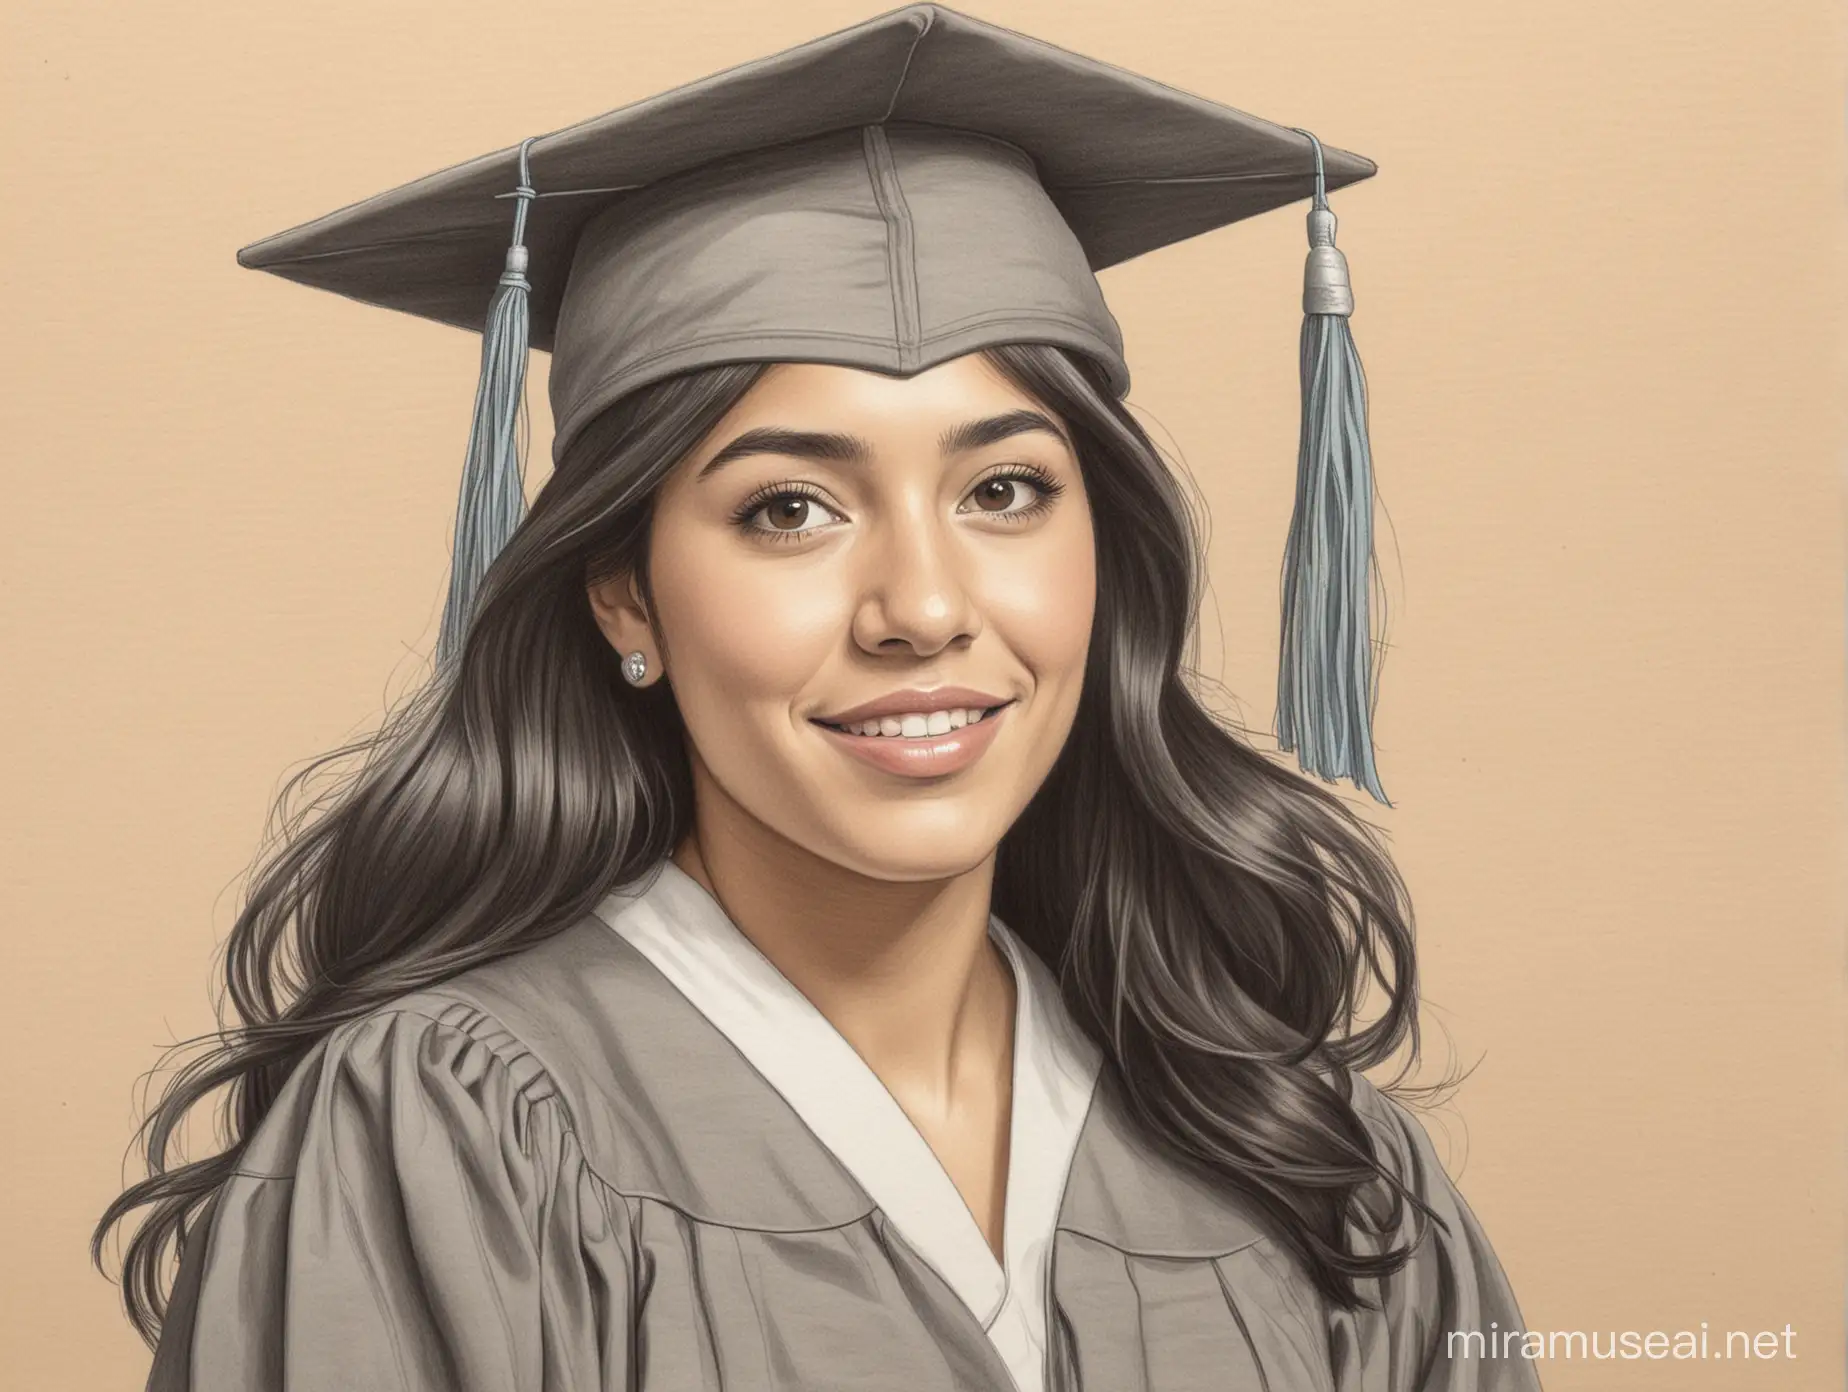 A drawing of a female Hispanic college graduate who prefers to associate with people like herself in gender, nationality, and educational attainment